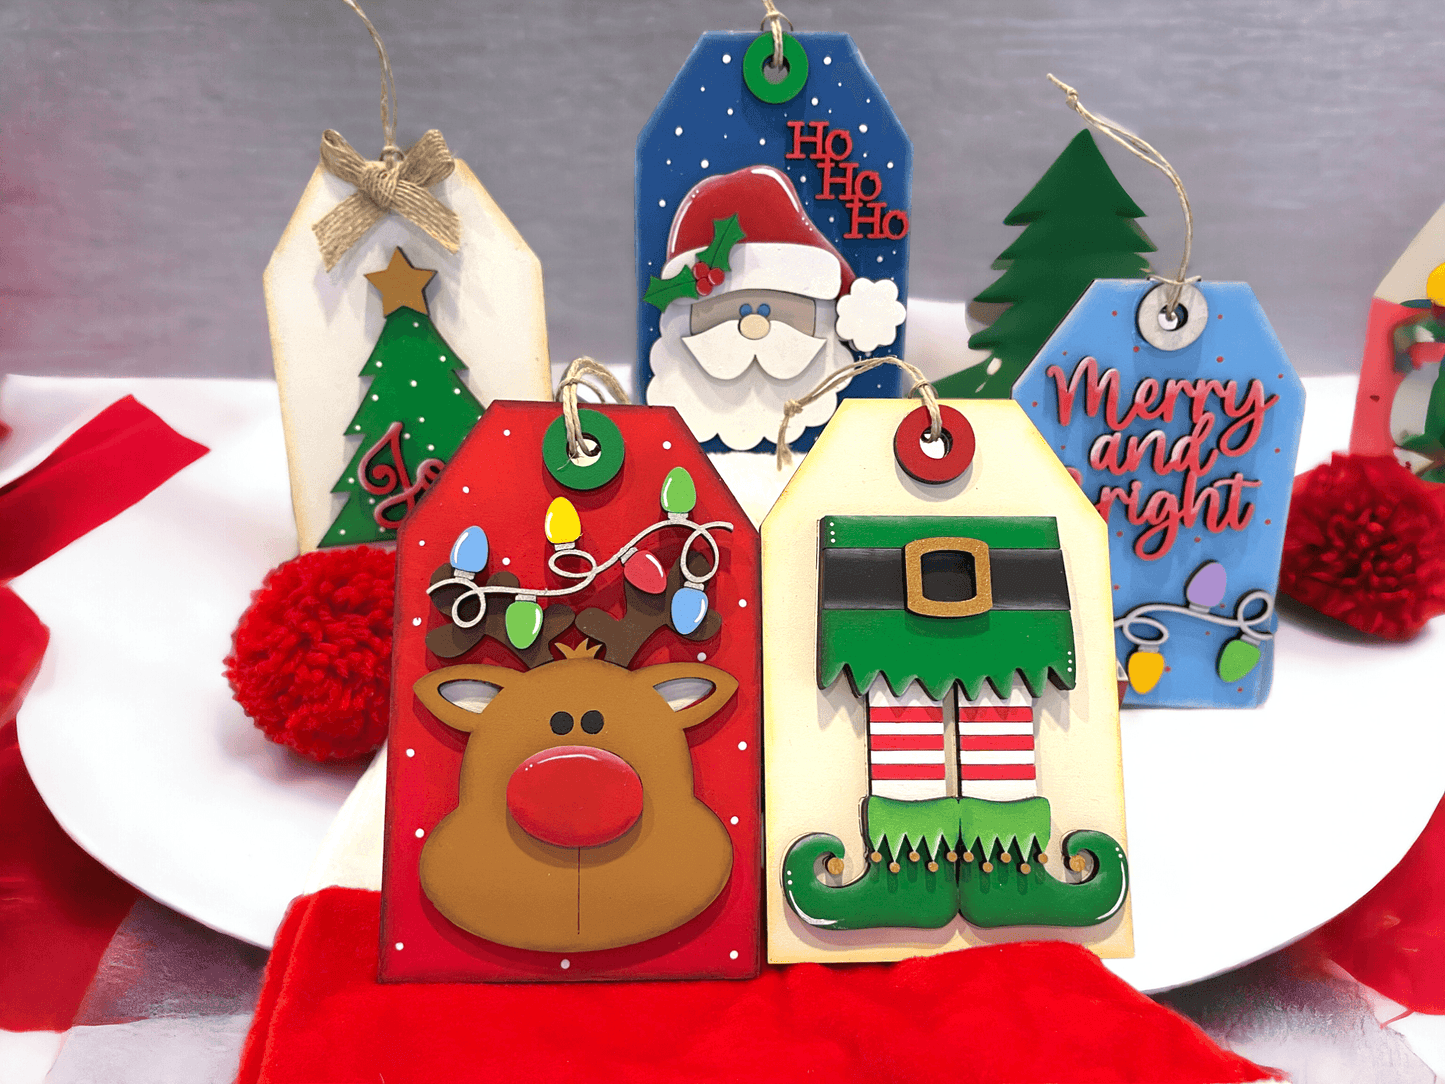 Christmas Gift Tag Ornaments Set of 5 Ornaments Great for your tree or gift giving - RusticFarmhouseDecor